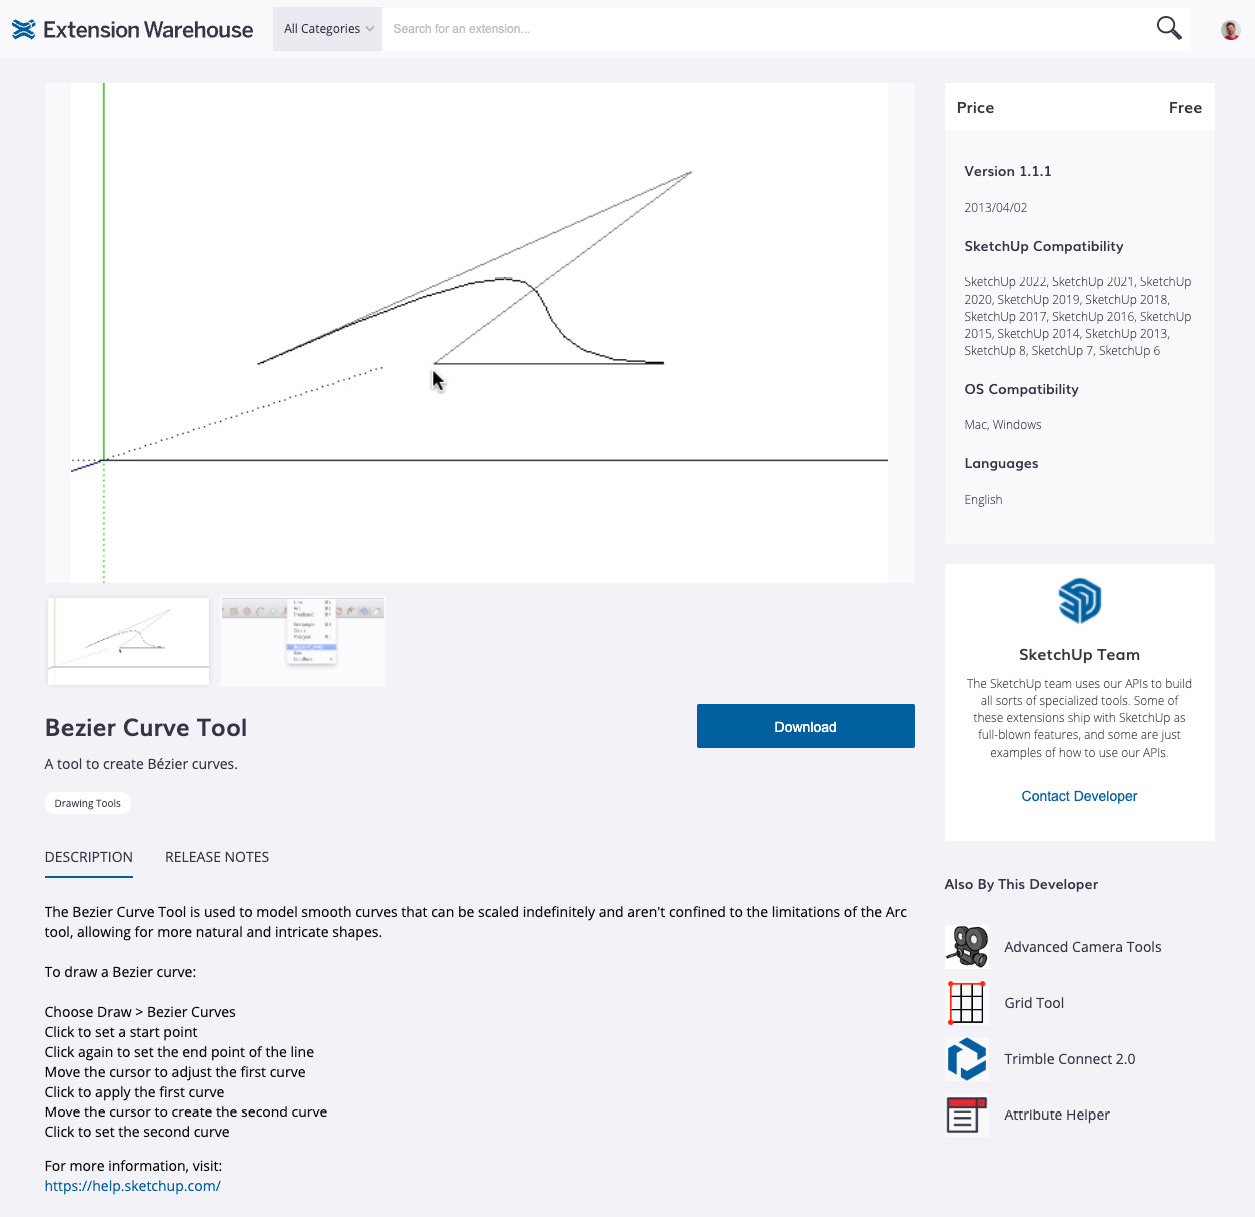 Figure 12.8 – Bezier Curve Tool page on Extension Warehouse
